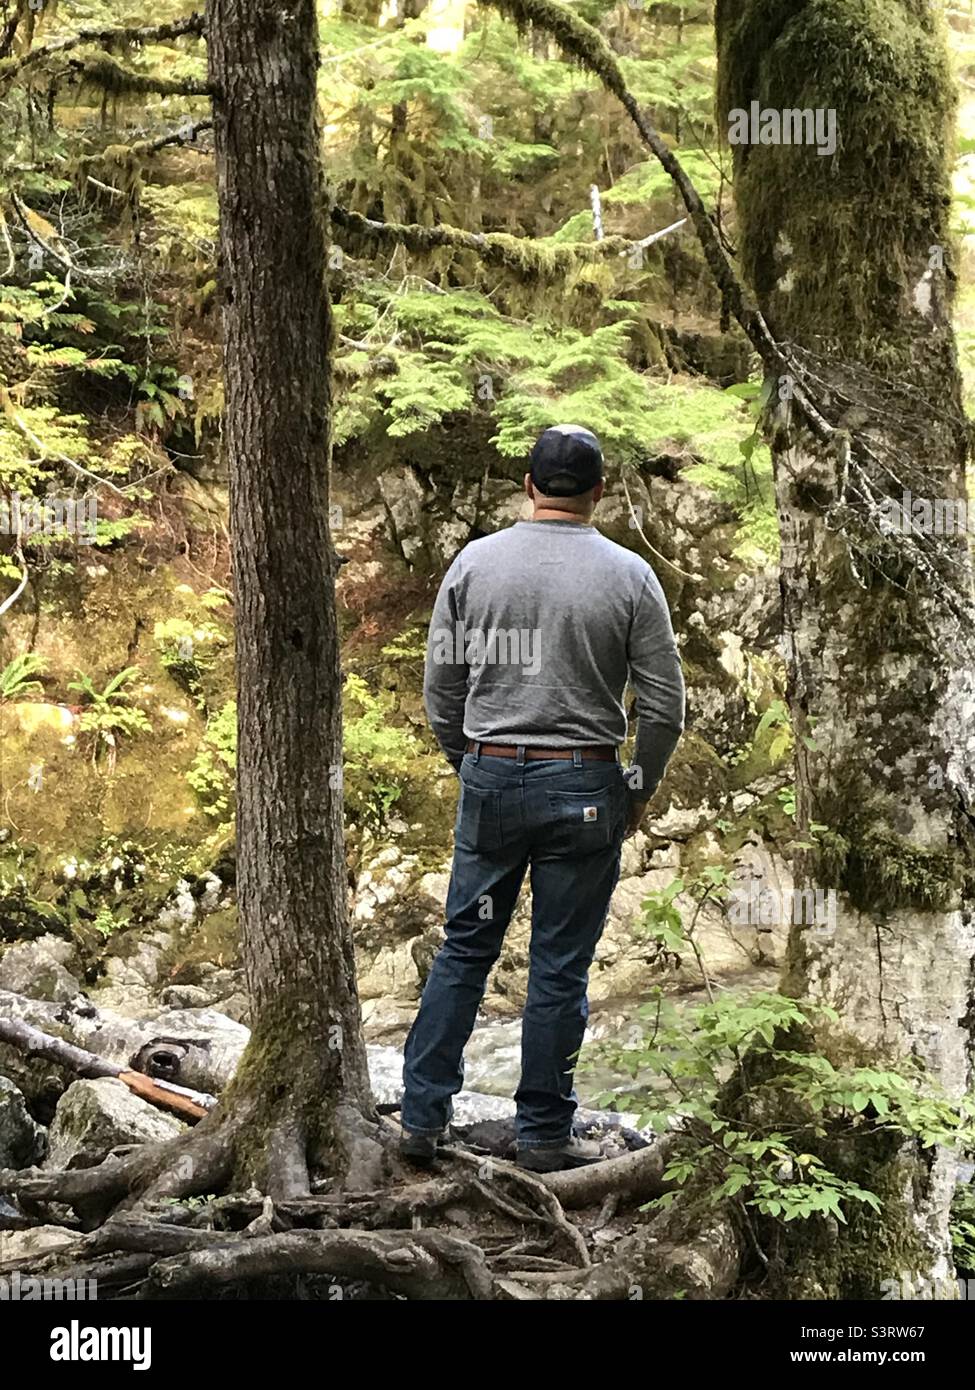 Pondering thoughts while looking into the forest Stock Photo